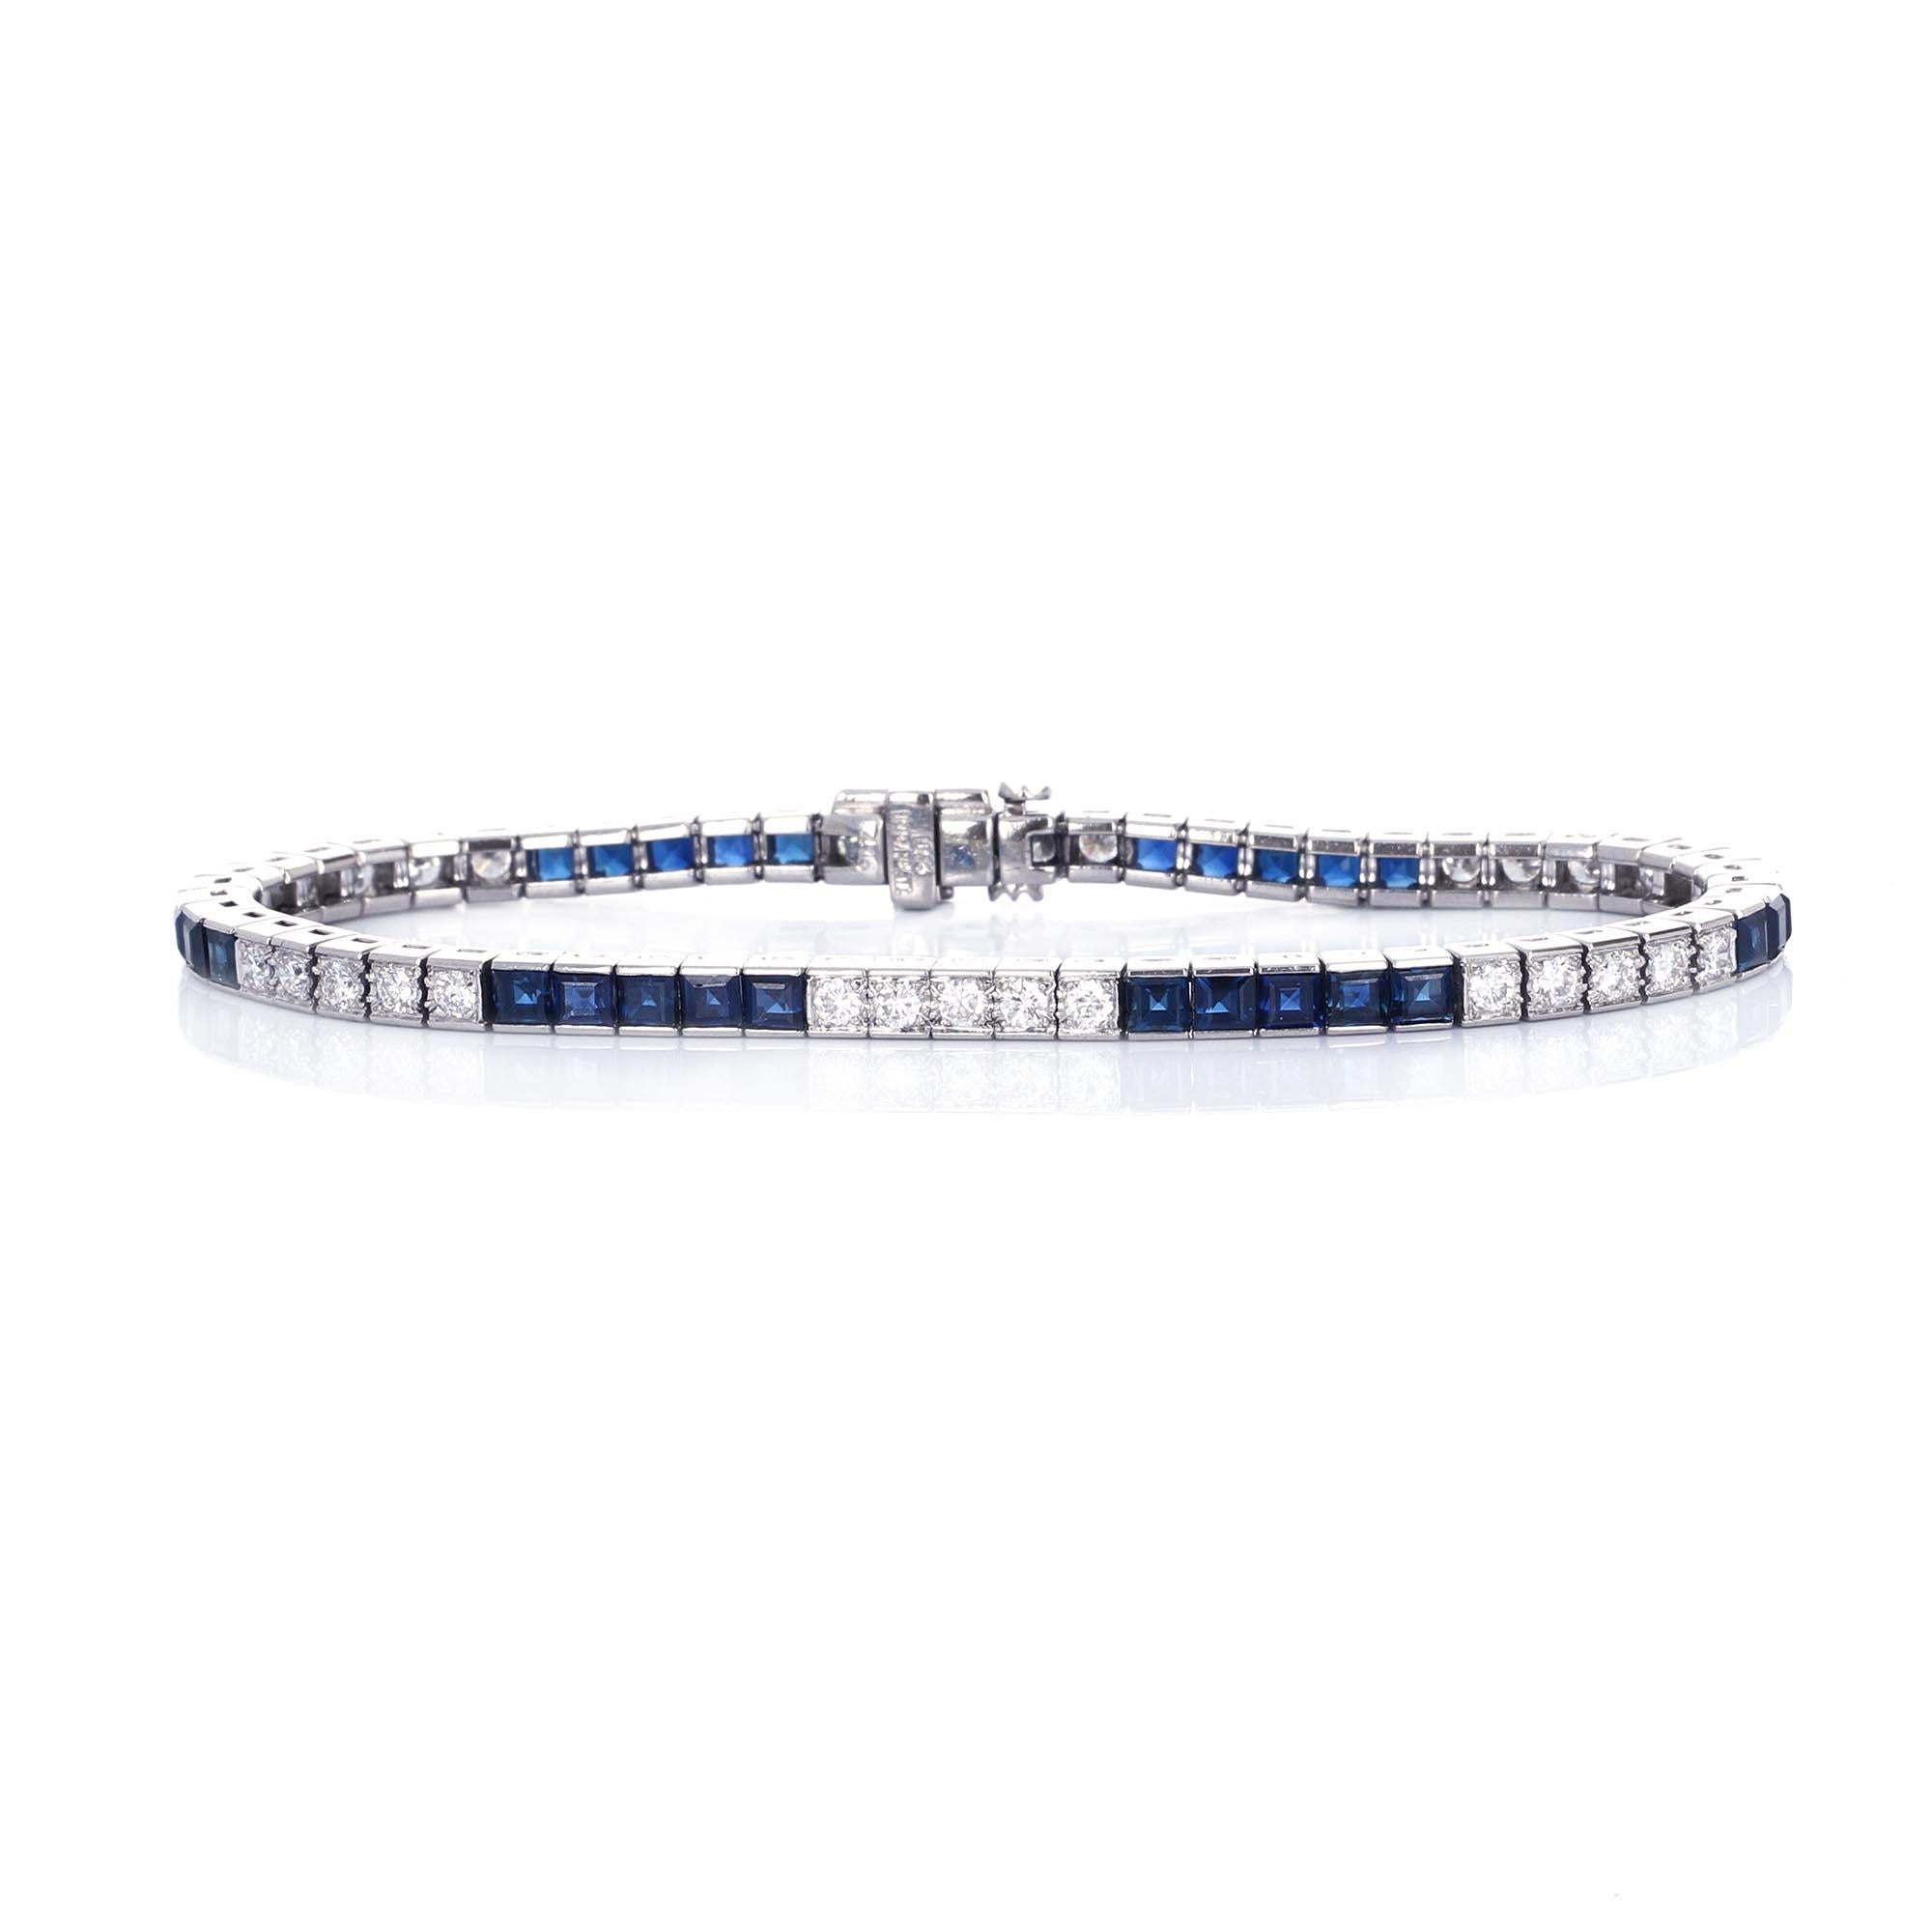 Platinum sapphire and diamond straight line retro bracelet. The bracelet is composed of princess cut sapphires and round brilliant white diamonds. There are 30 diamonds weighing 1.80 carats total weight
